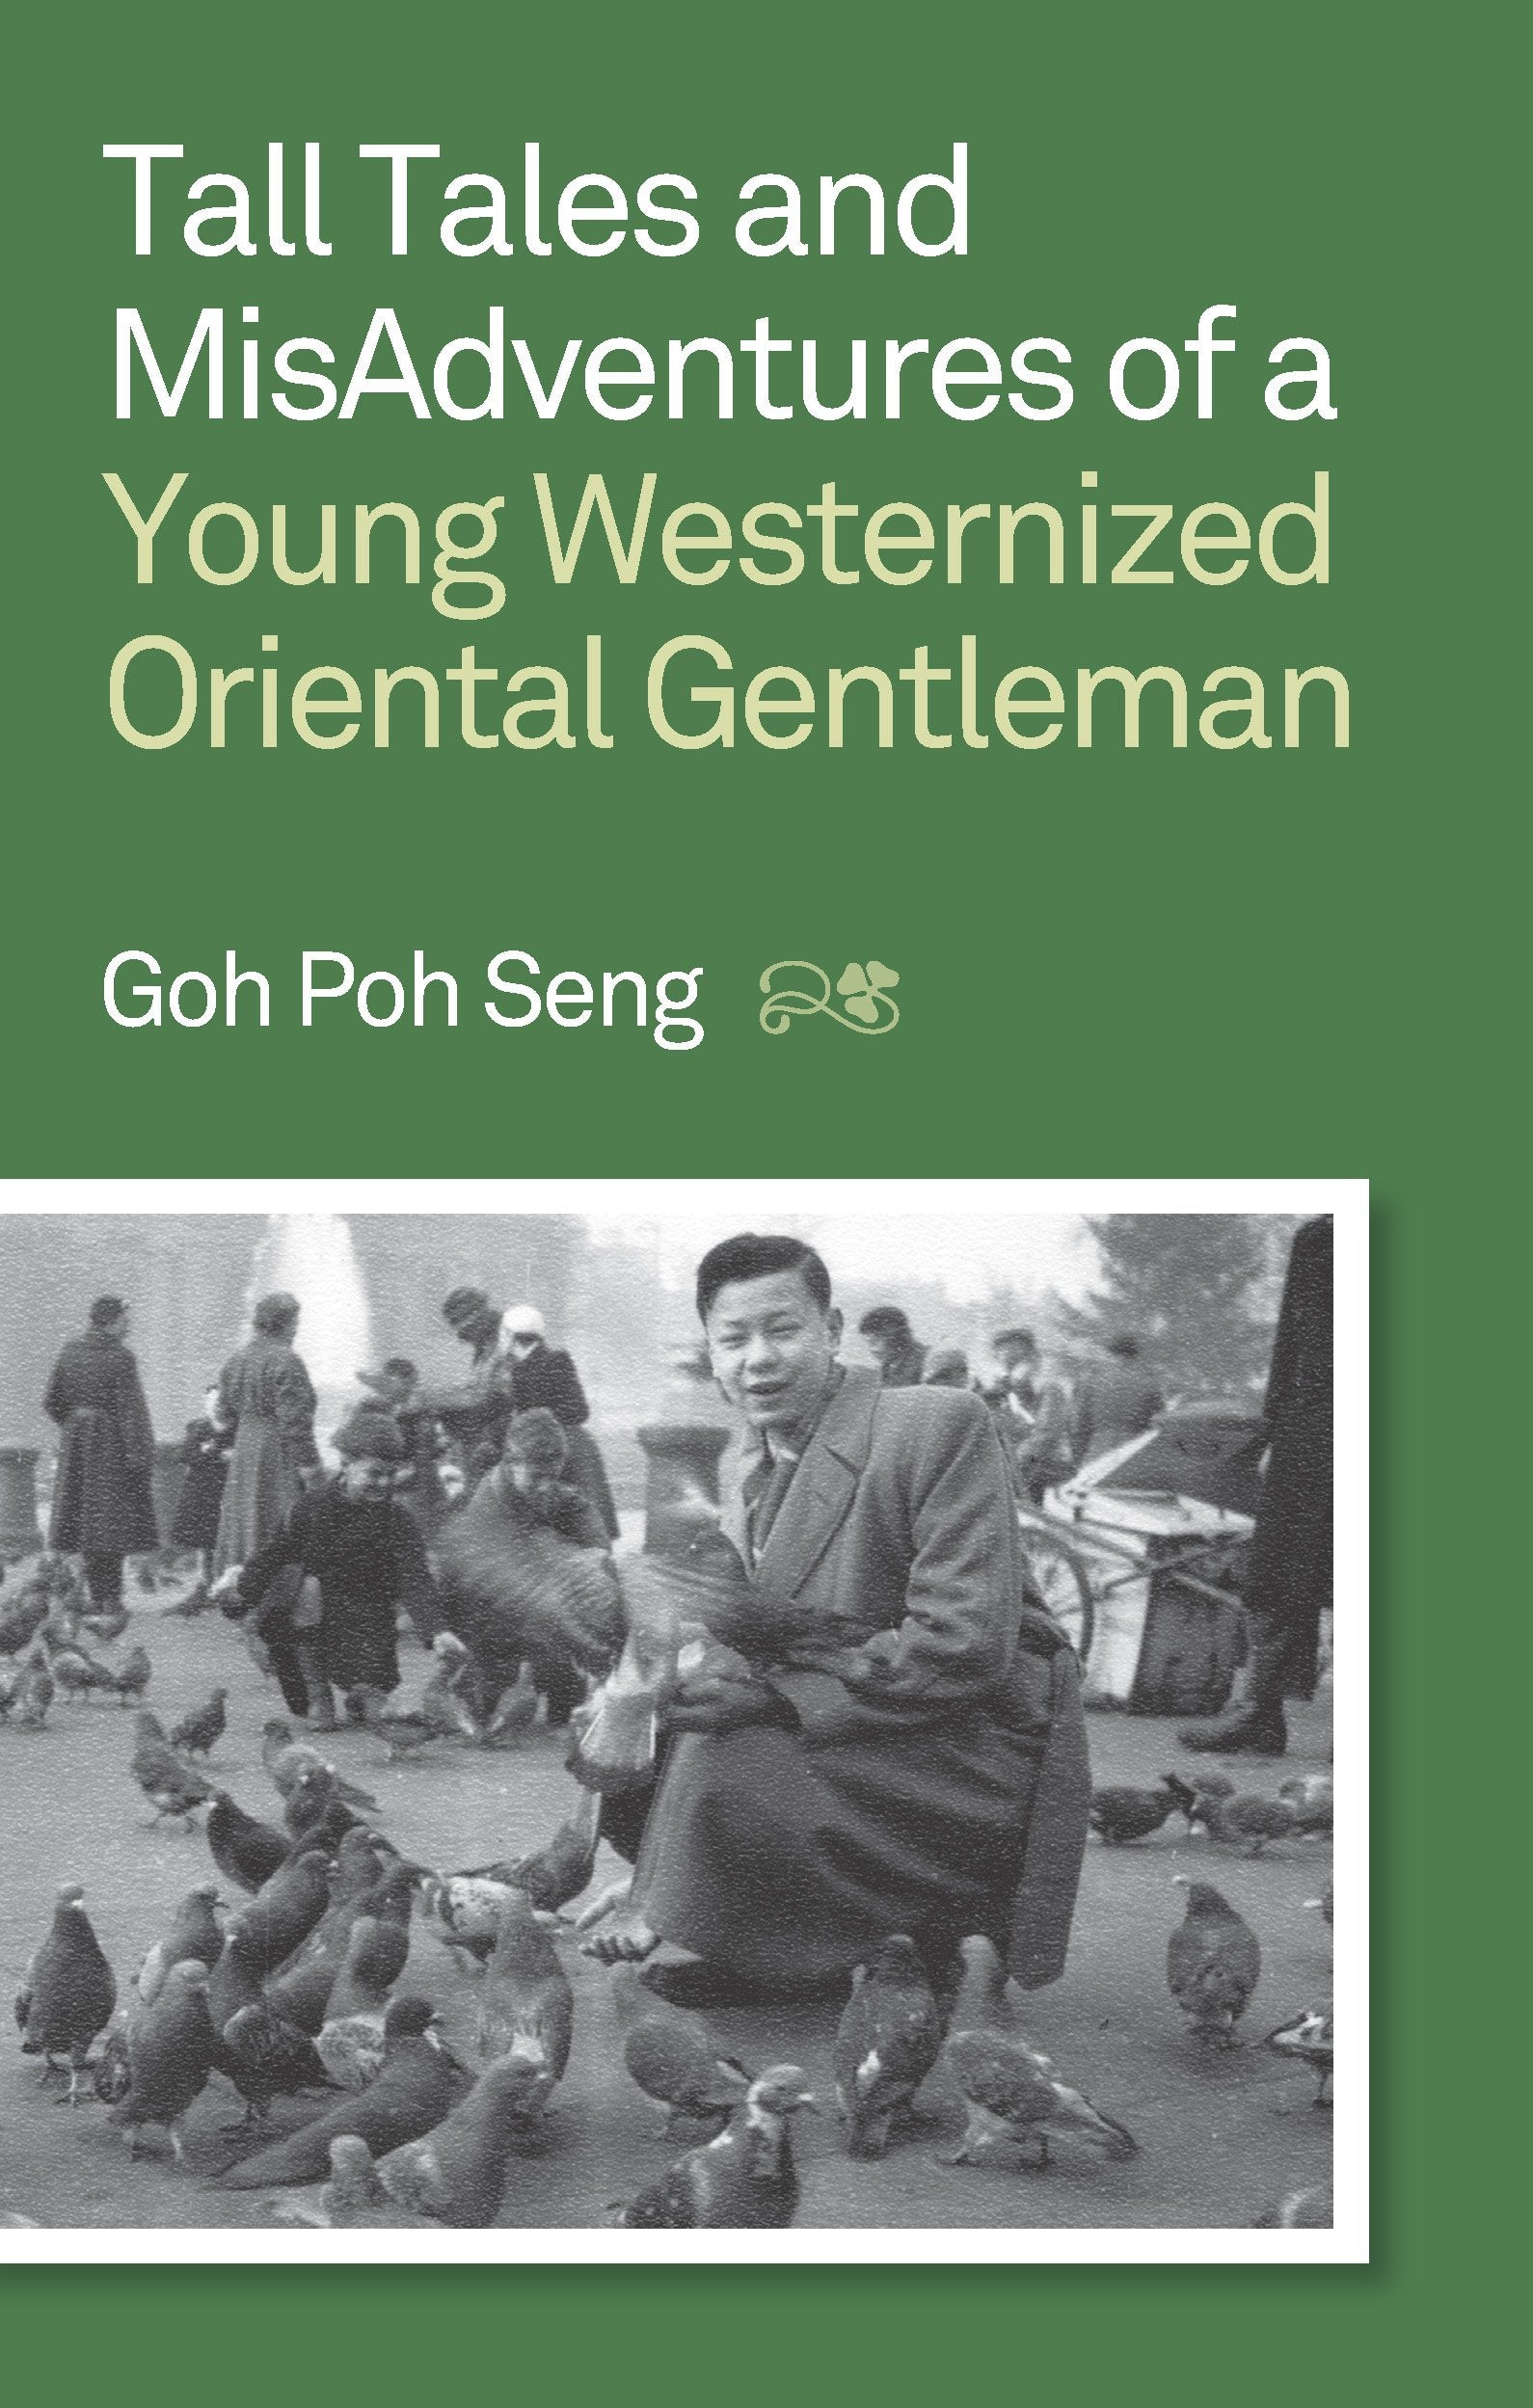 Tall Tales and MisAdventures of a Young Westernized Oriental Gentleman